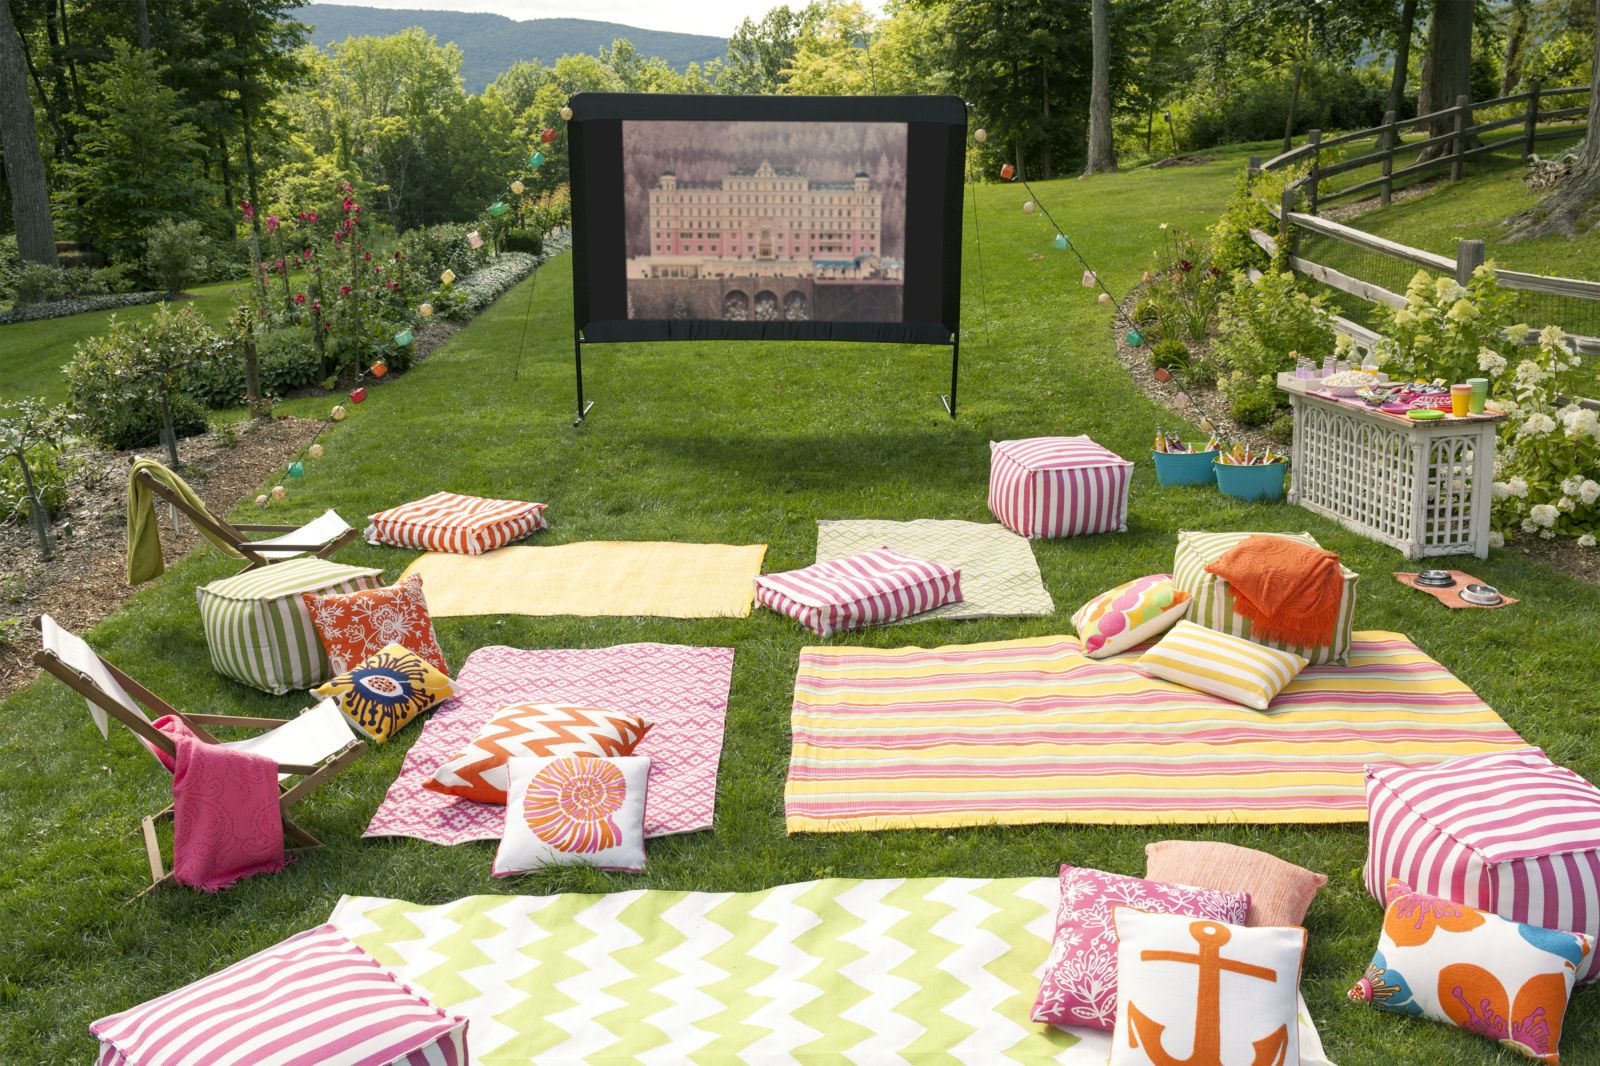 sweet 16 party ideas - Outdoor Movie Party